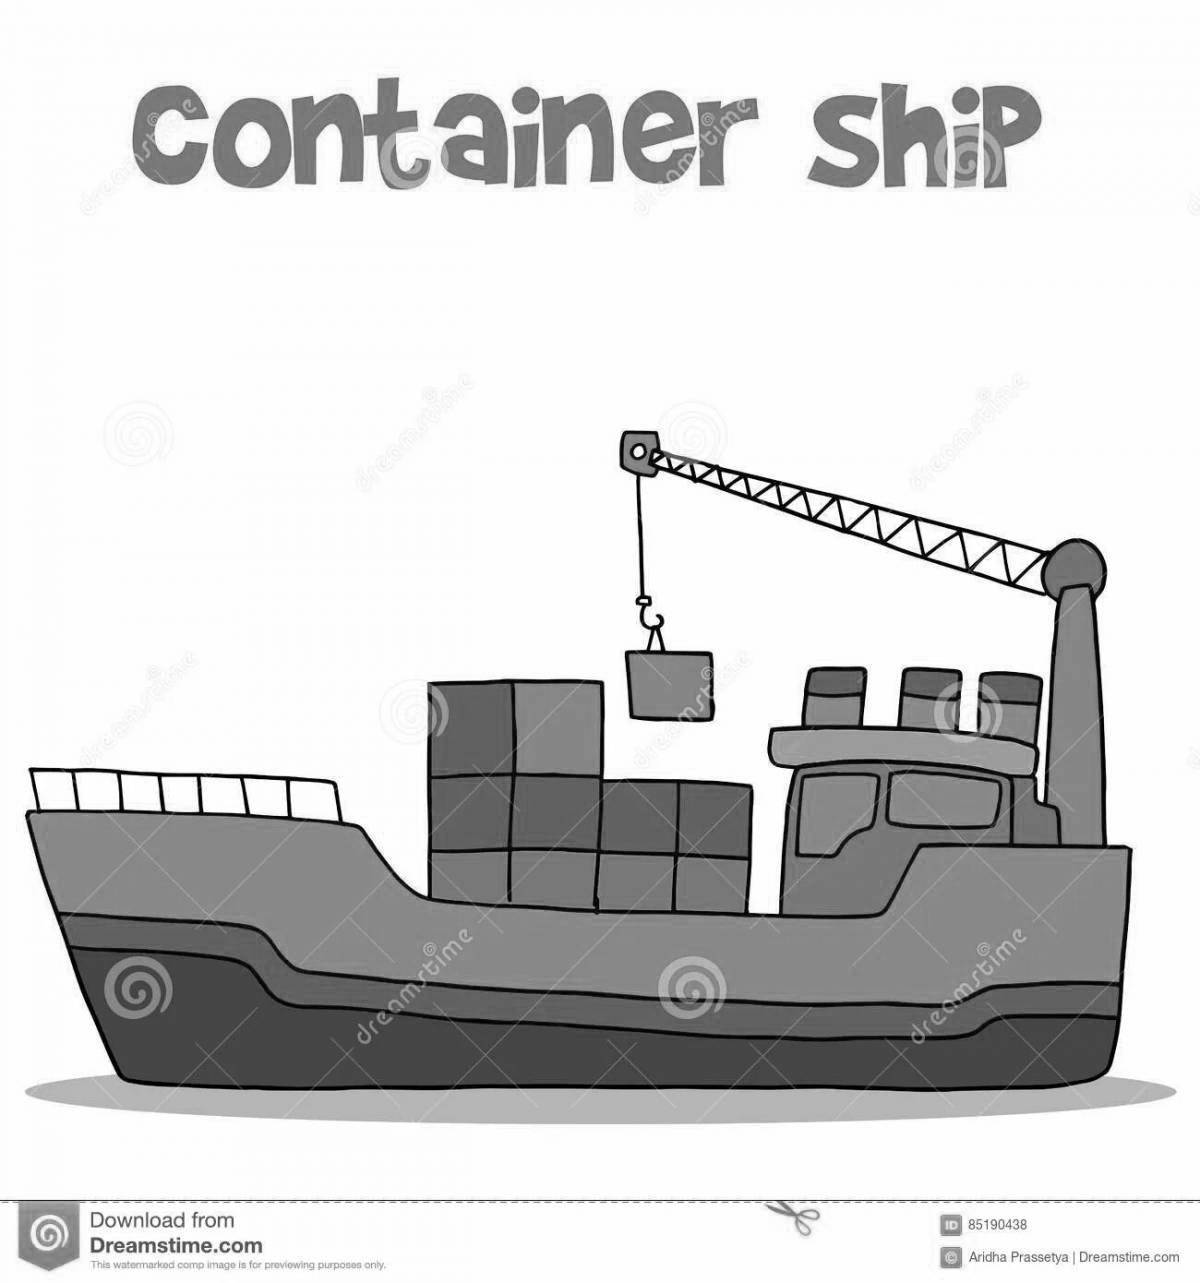 Container ship #1